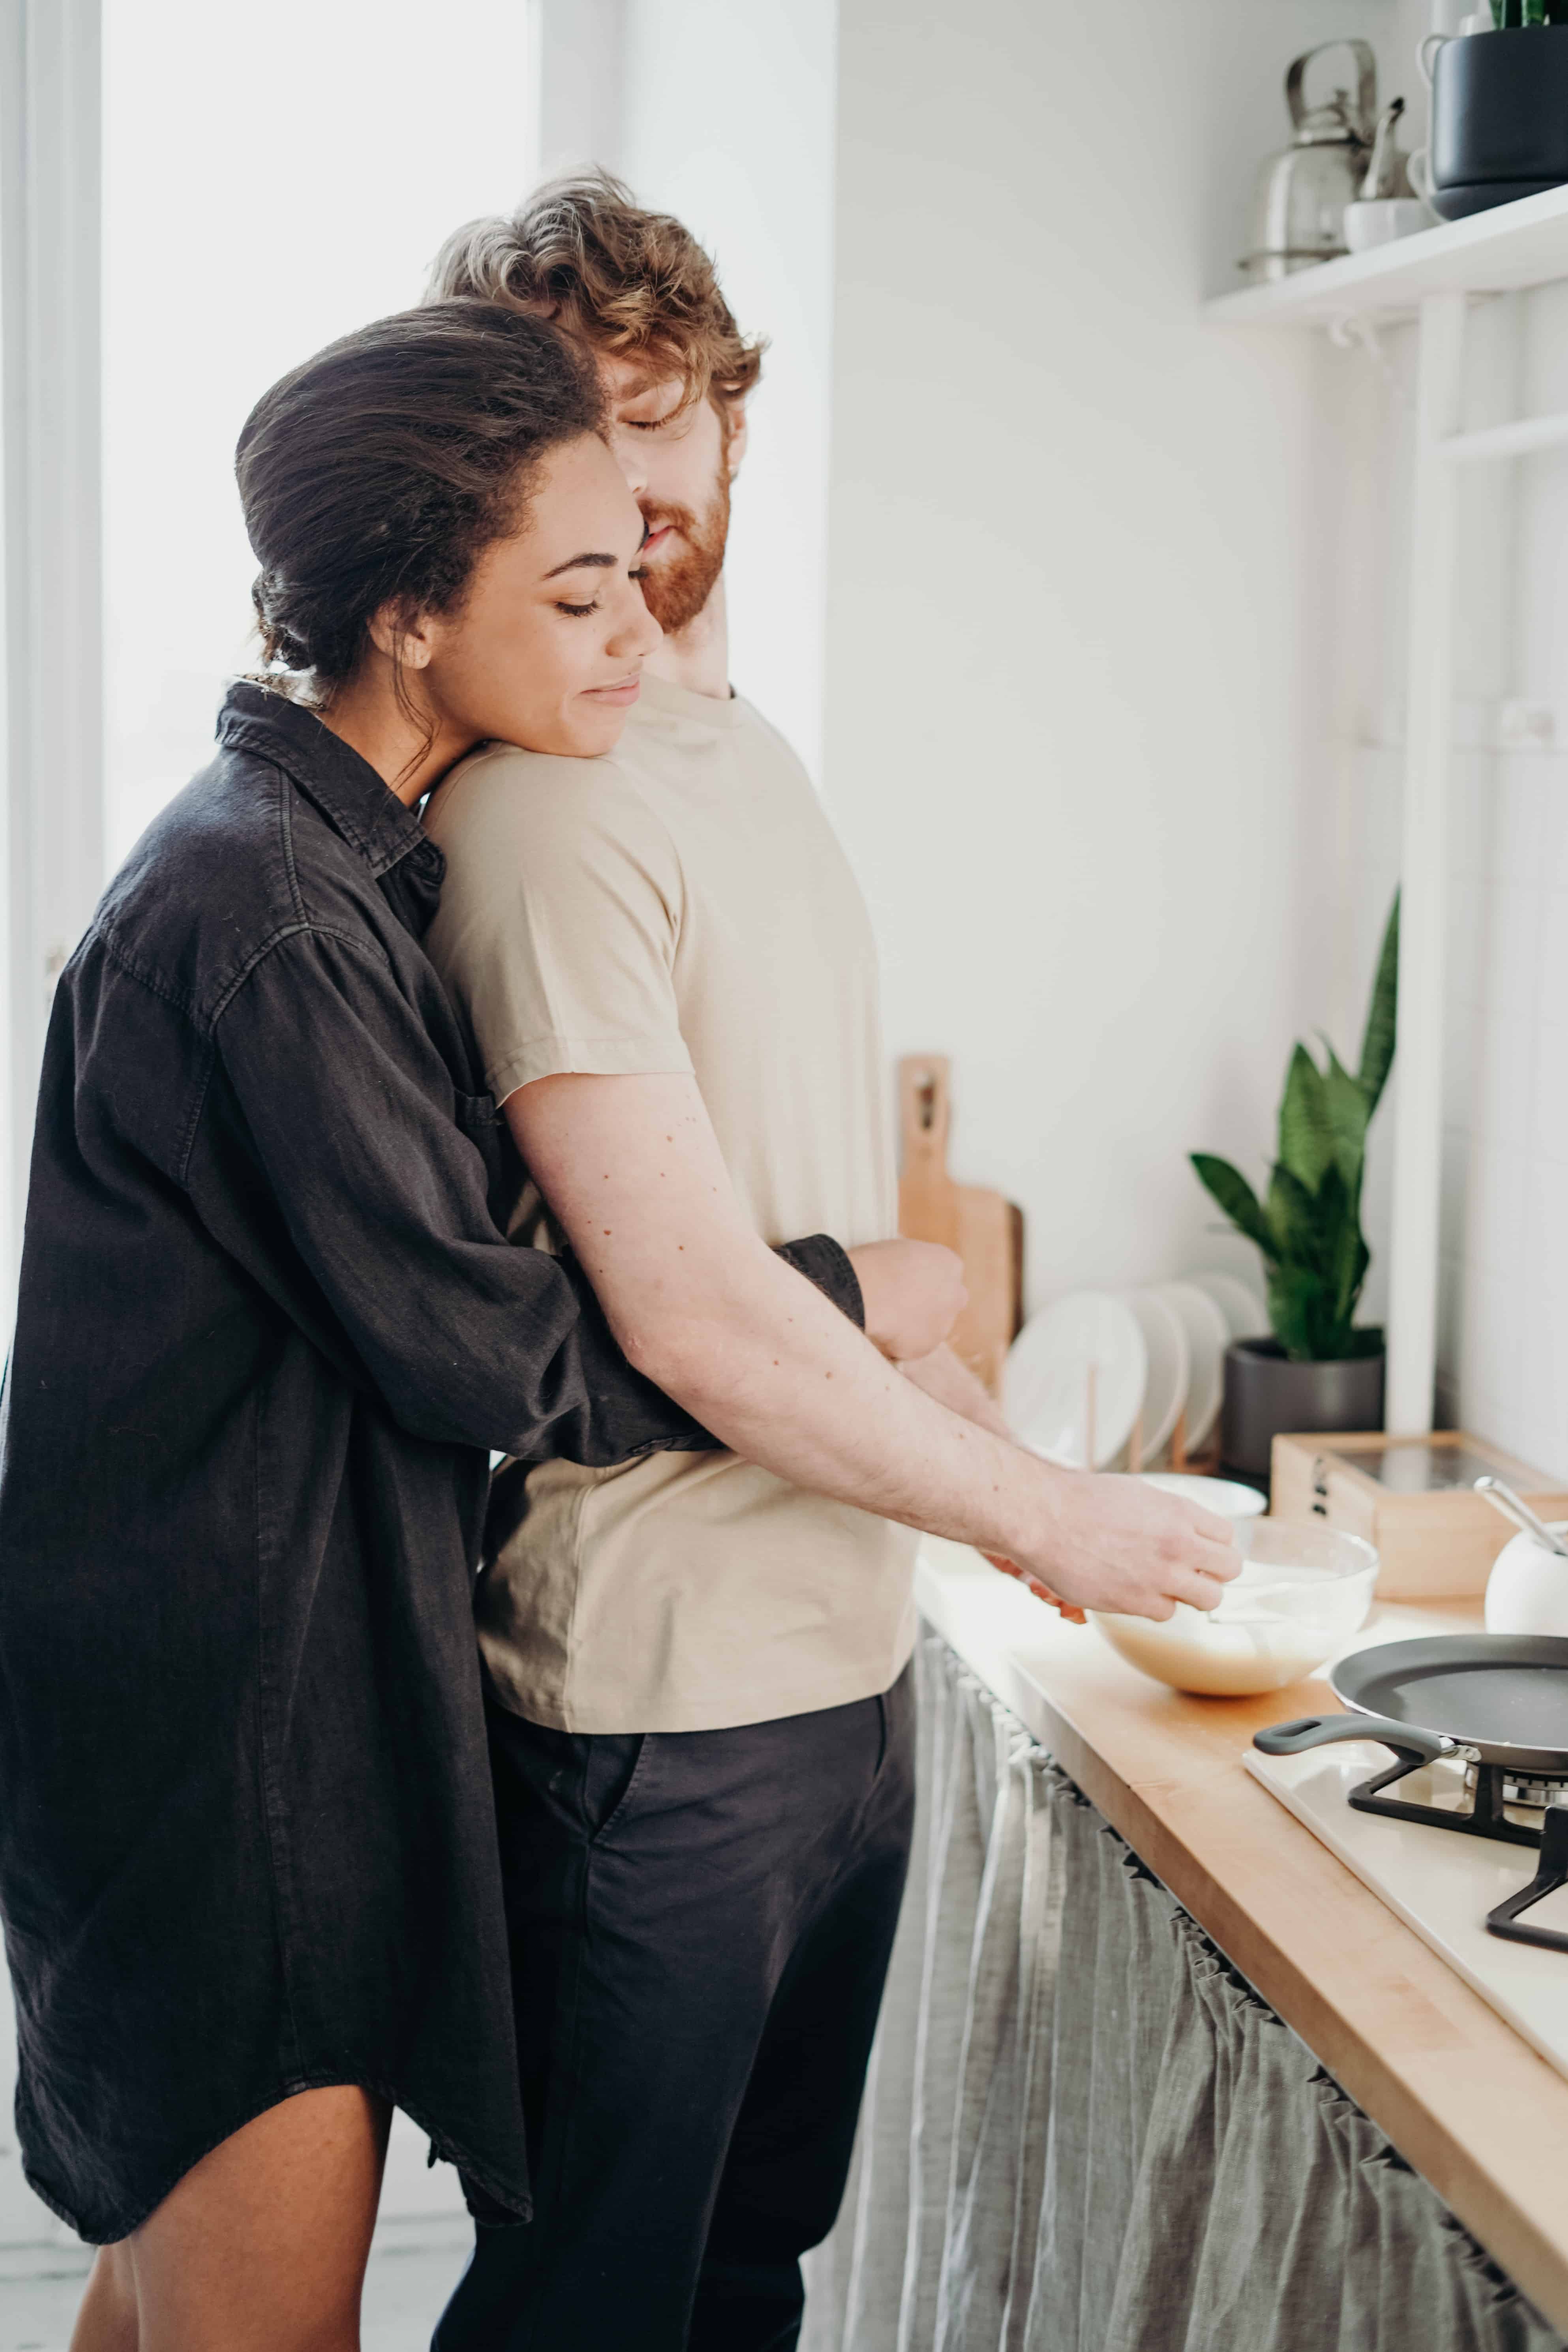 Photo of a couple making cooking together in their kitchen. One partner is preparing food while the other embraces him from behind.